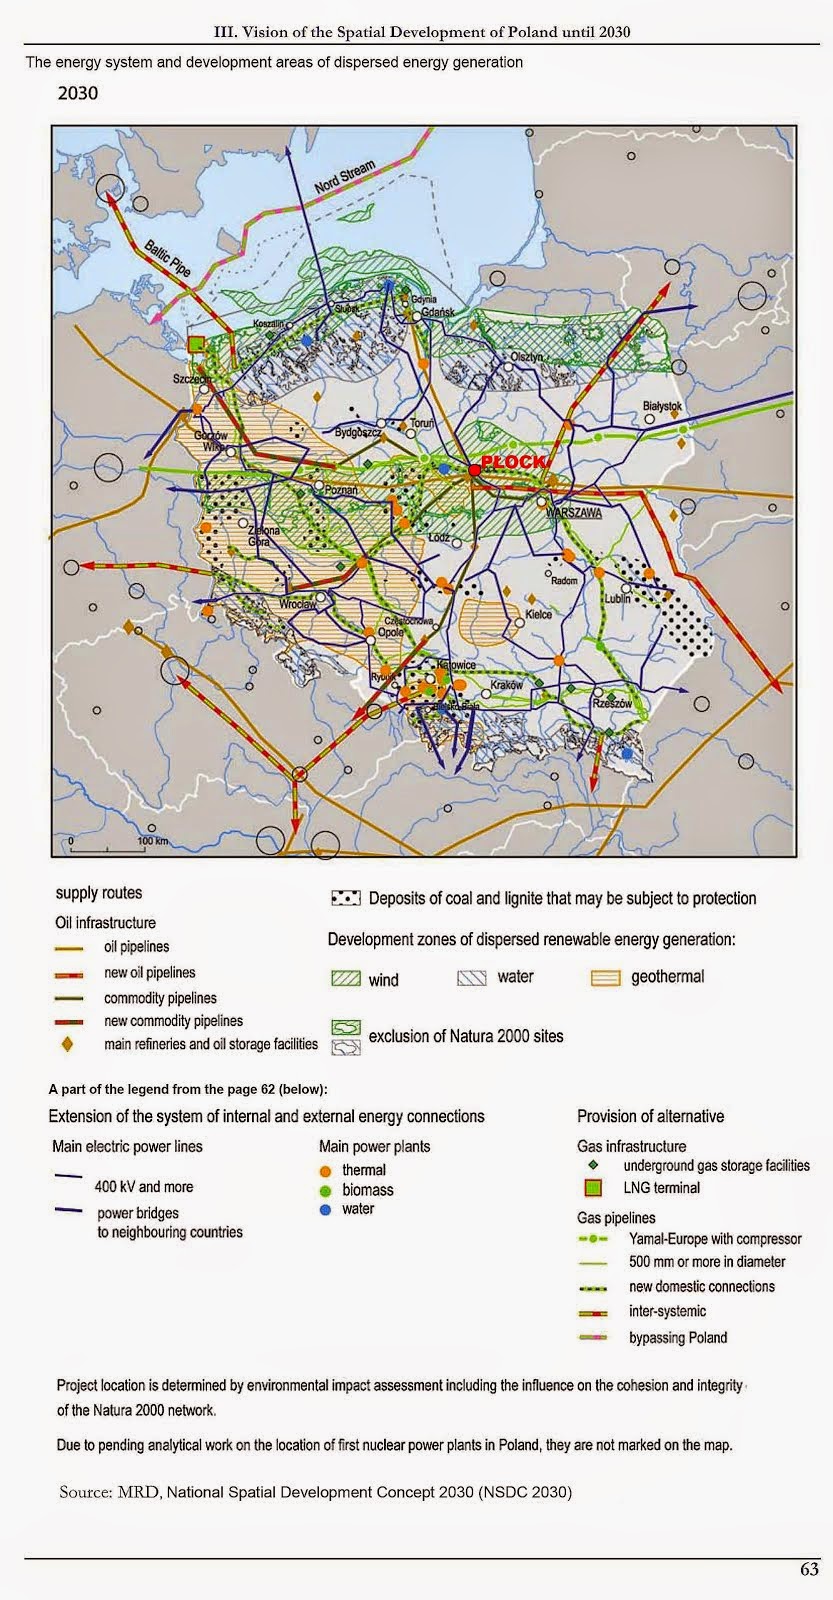 The energy system and development areas of dispersed energy generation in Poland